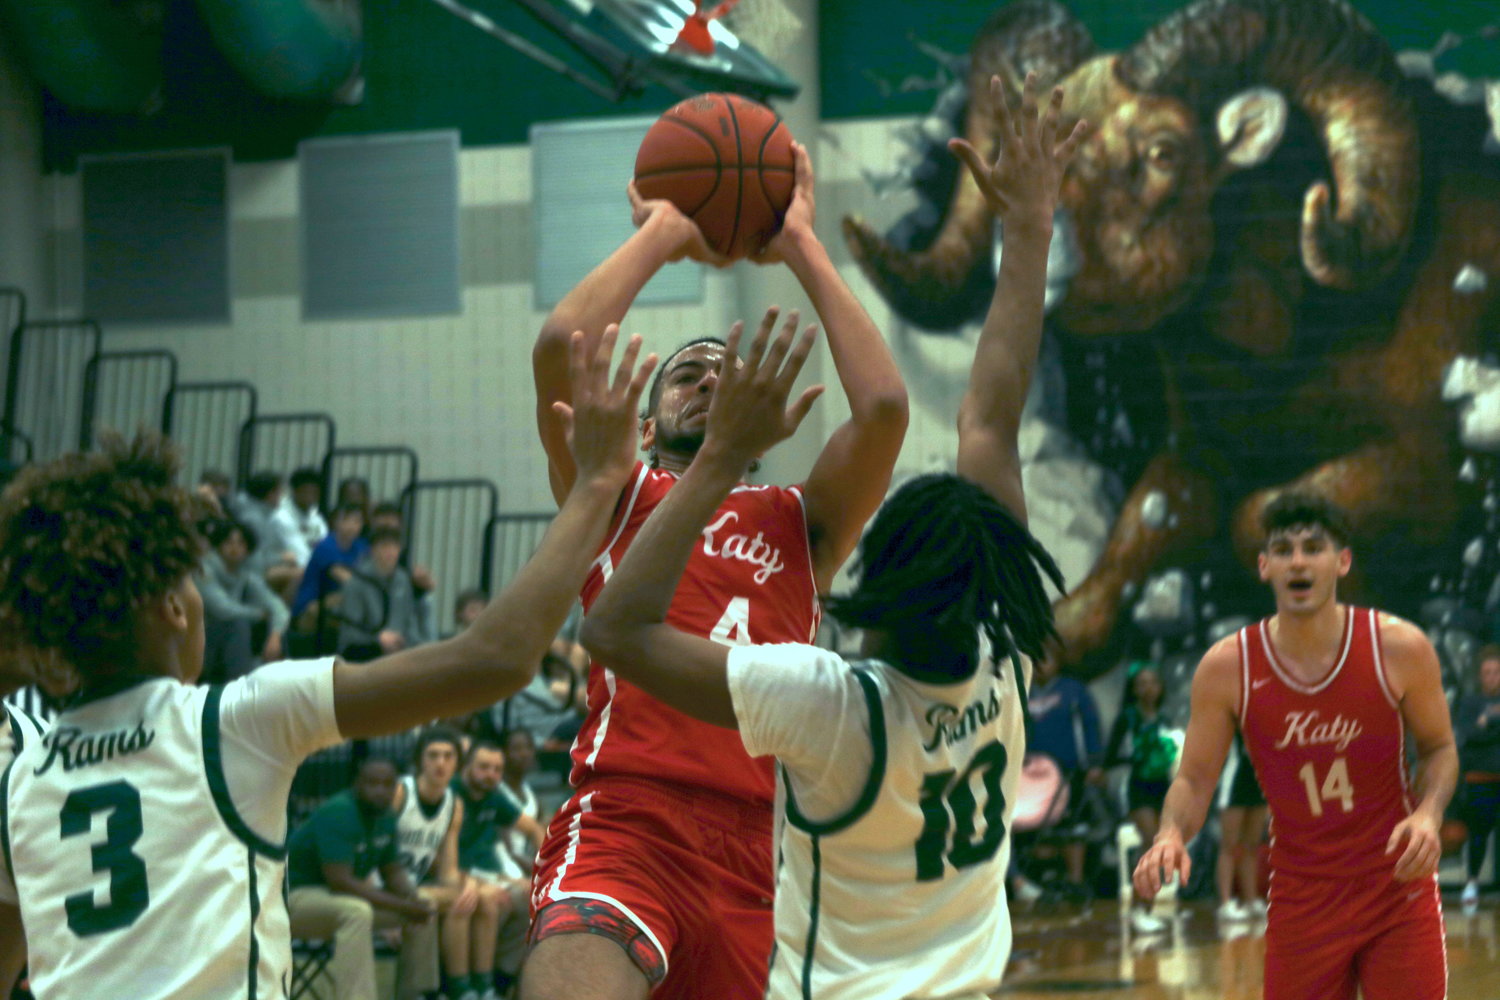 Katy’s Dayvaughn Froe shoots a fadeaway over two Mayde Creek defenders during Wednesday’s game at the Mayde Creek gym.